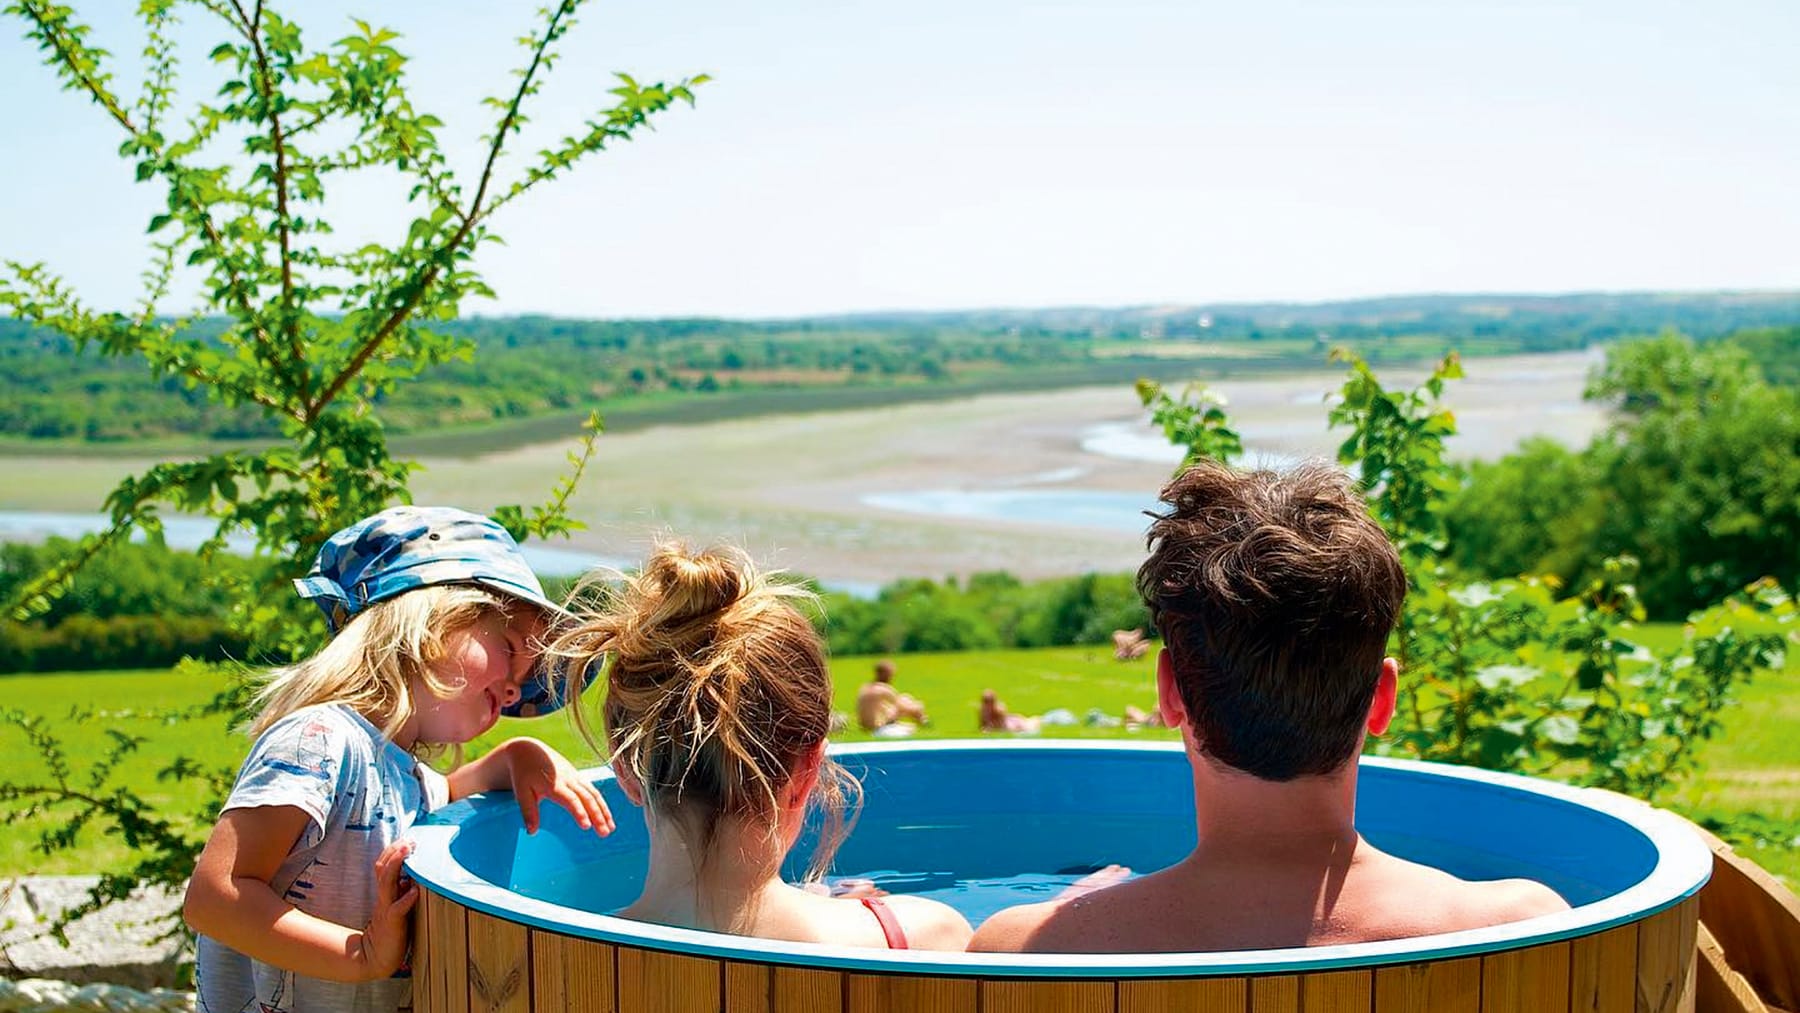 Photograph shows a couple in a hot tub overlooking a beach with a small child beside the hot tub